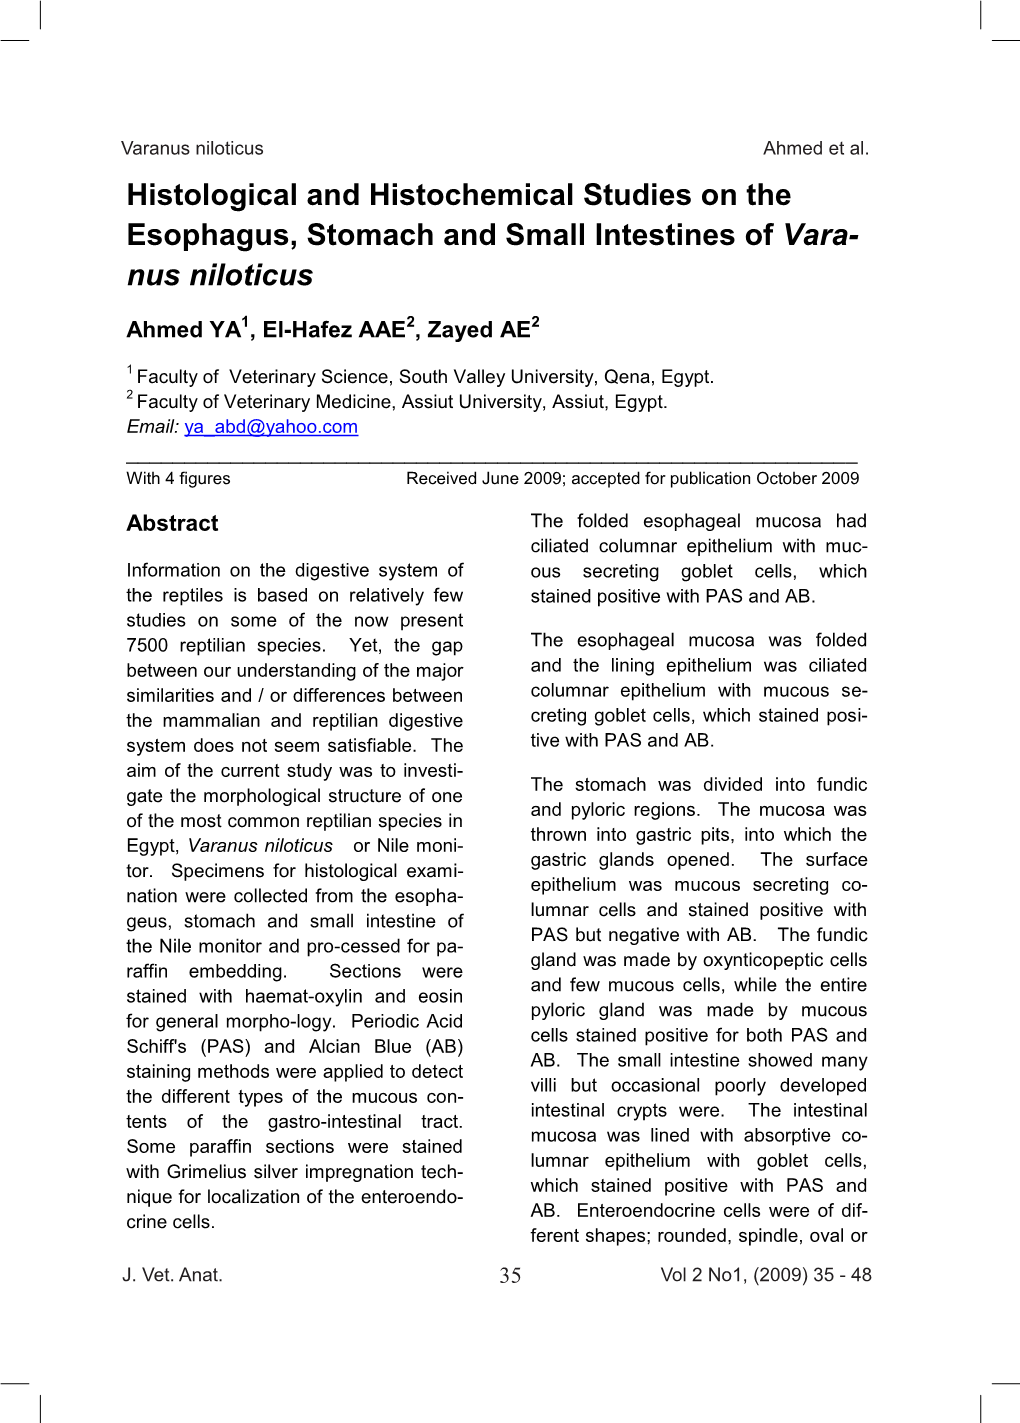 Histological and Histochemical Studies on the Esophagus, Stomach and Small Intestines of Vara- Nus Niloticus